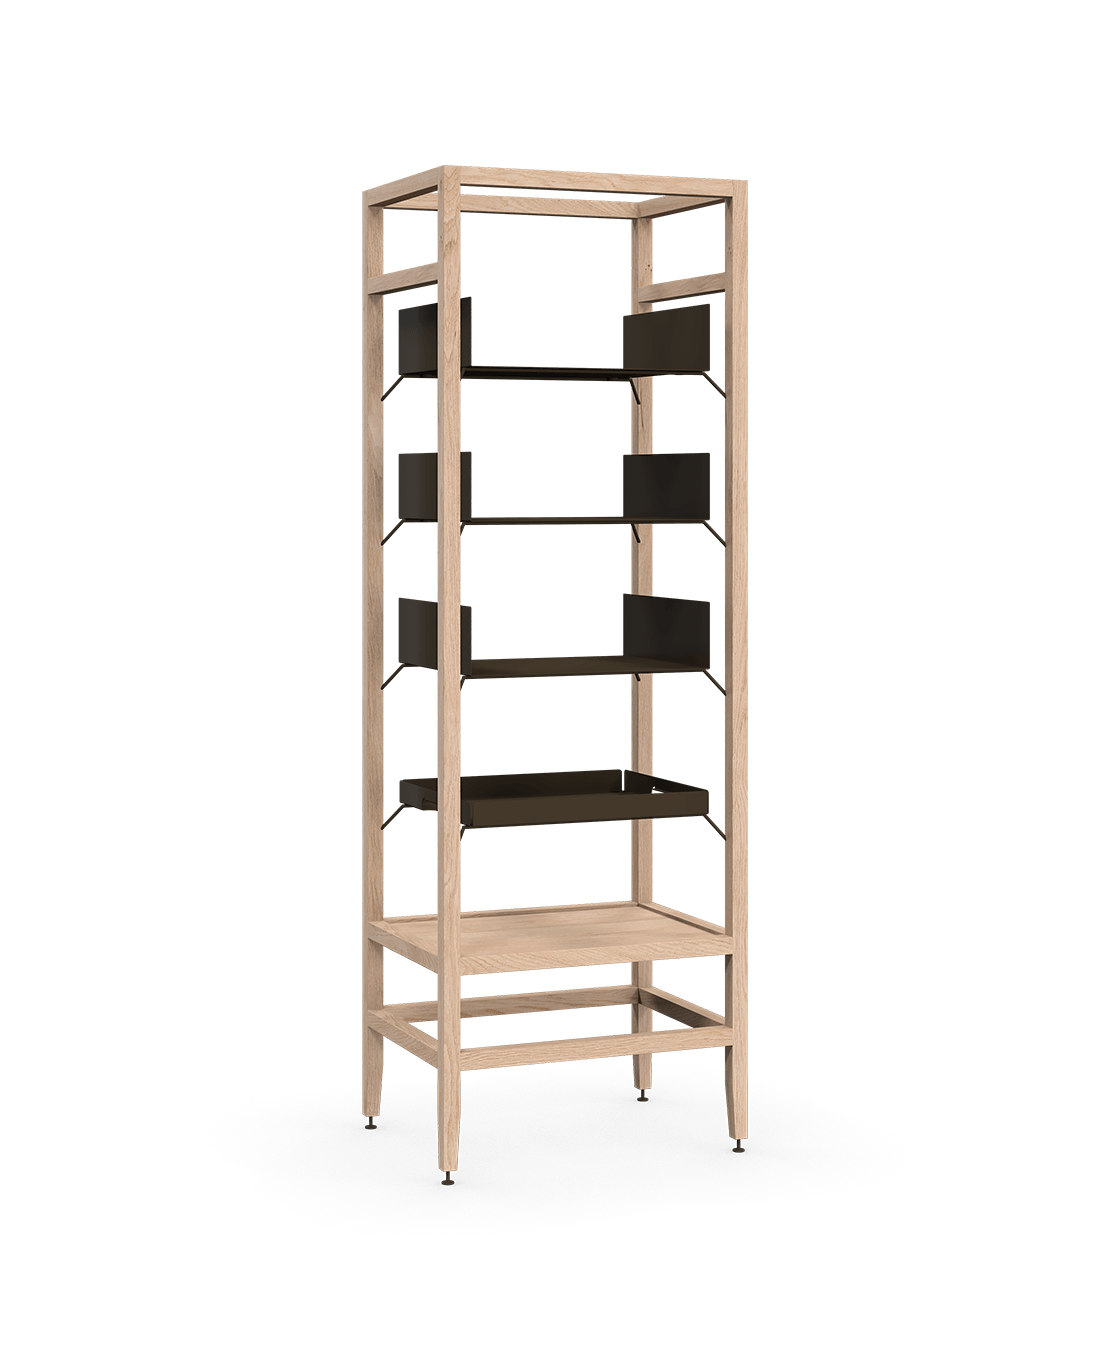 Coquo modular tall shelving unit in natural oak and metal shelves. Perfect for the kitchen, dining or living room. 